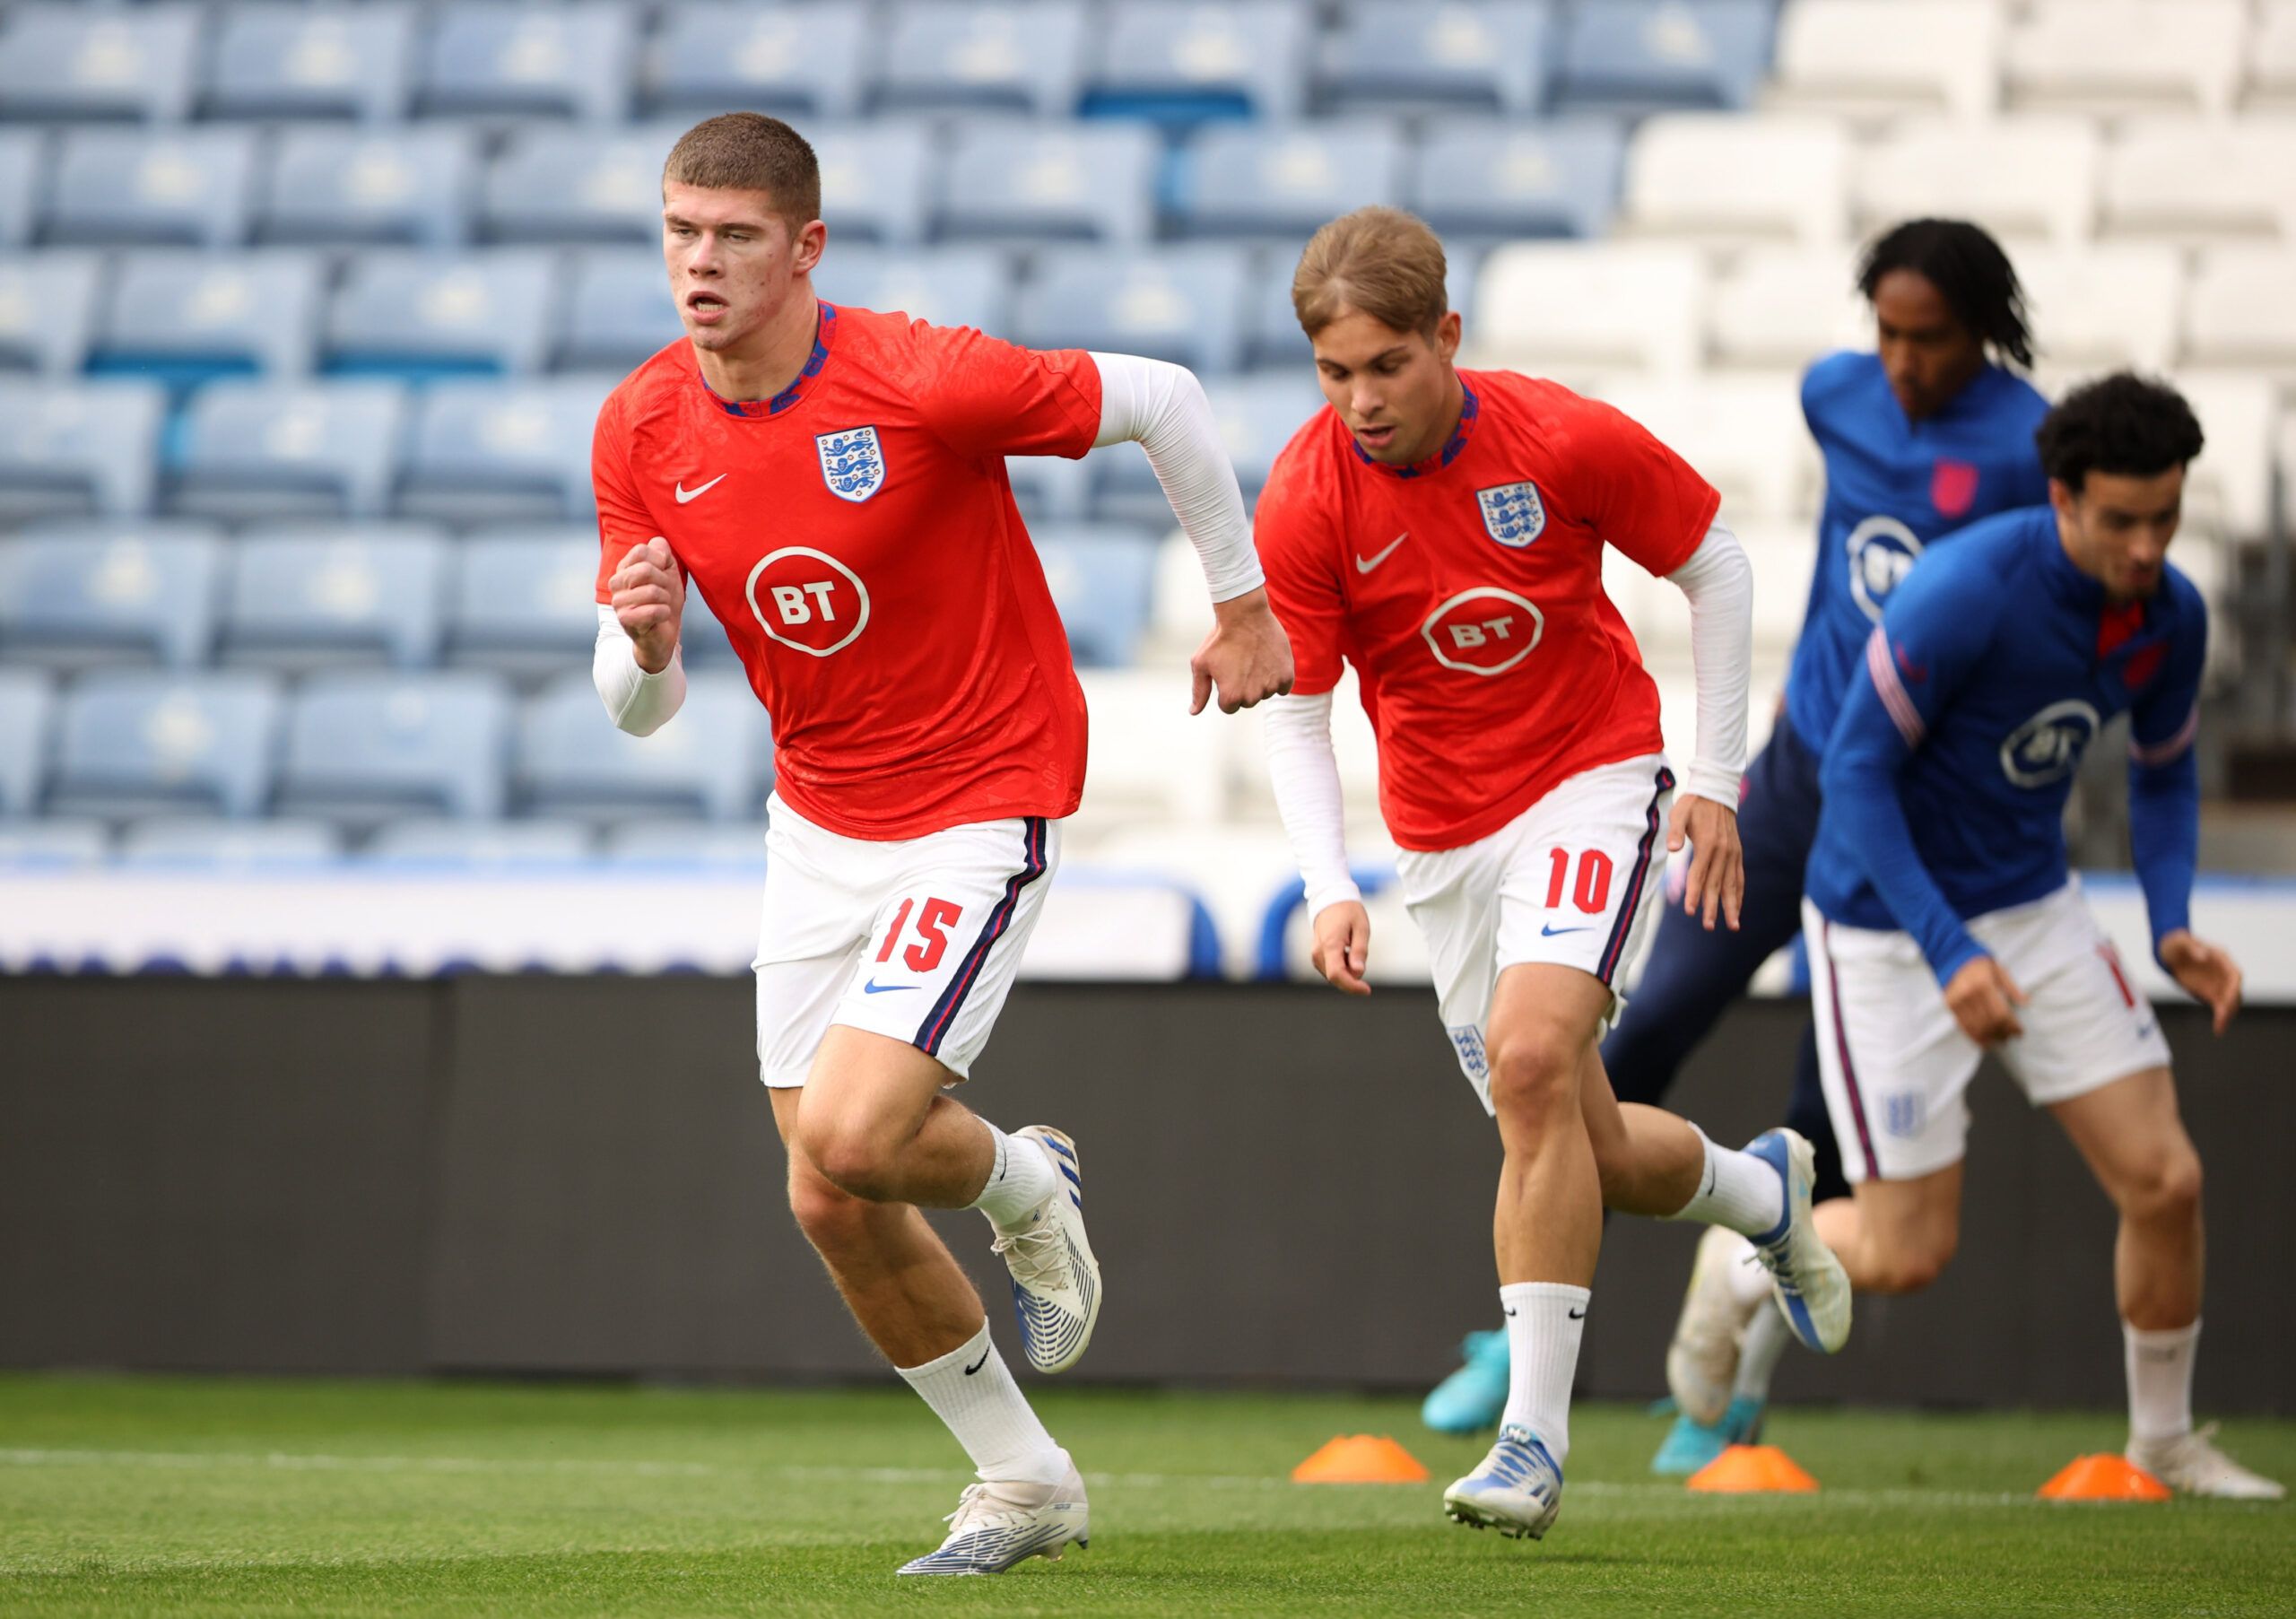 Soccer Football - European Under-21 Championship Qualifying - England v Slovenia - The John Smith's Stadium, Huddersfield, Britain - June 13, 2022 England's Charlie Cresswell during the warm up Action Images via Reuters/Molly Darlington